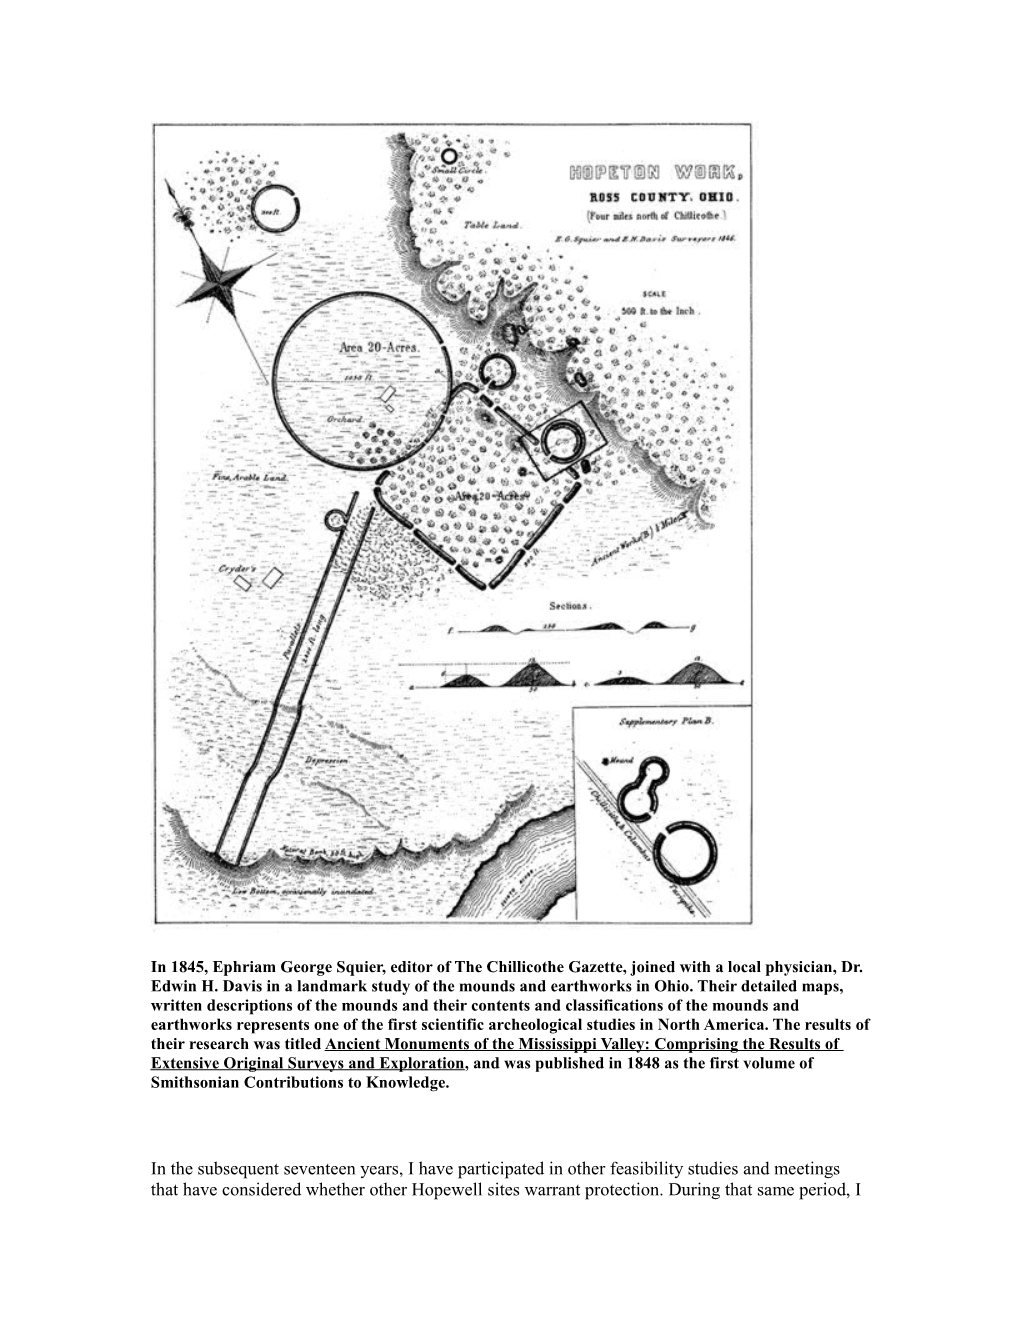 The Newsletter of Hopewell Archeology in the Ohio River Valley